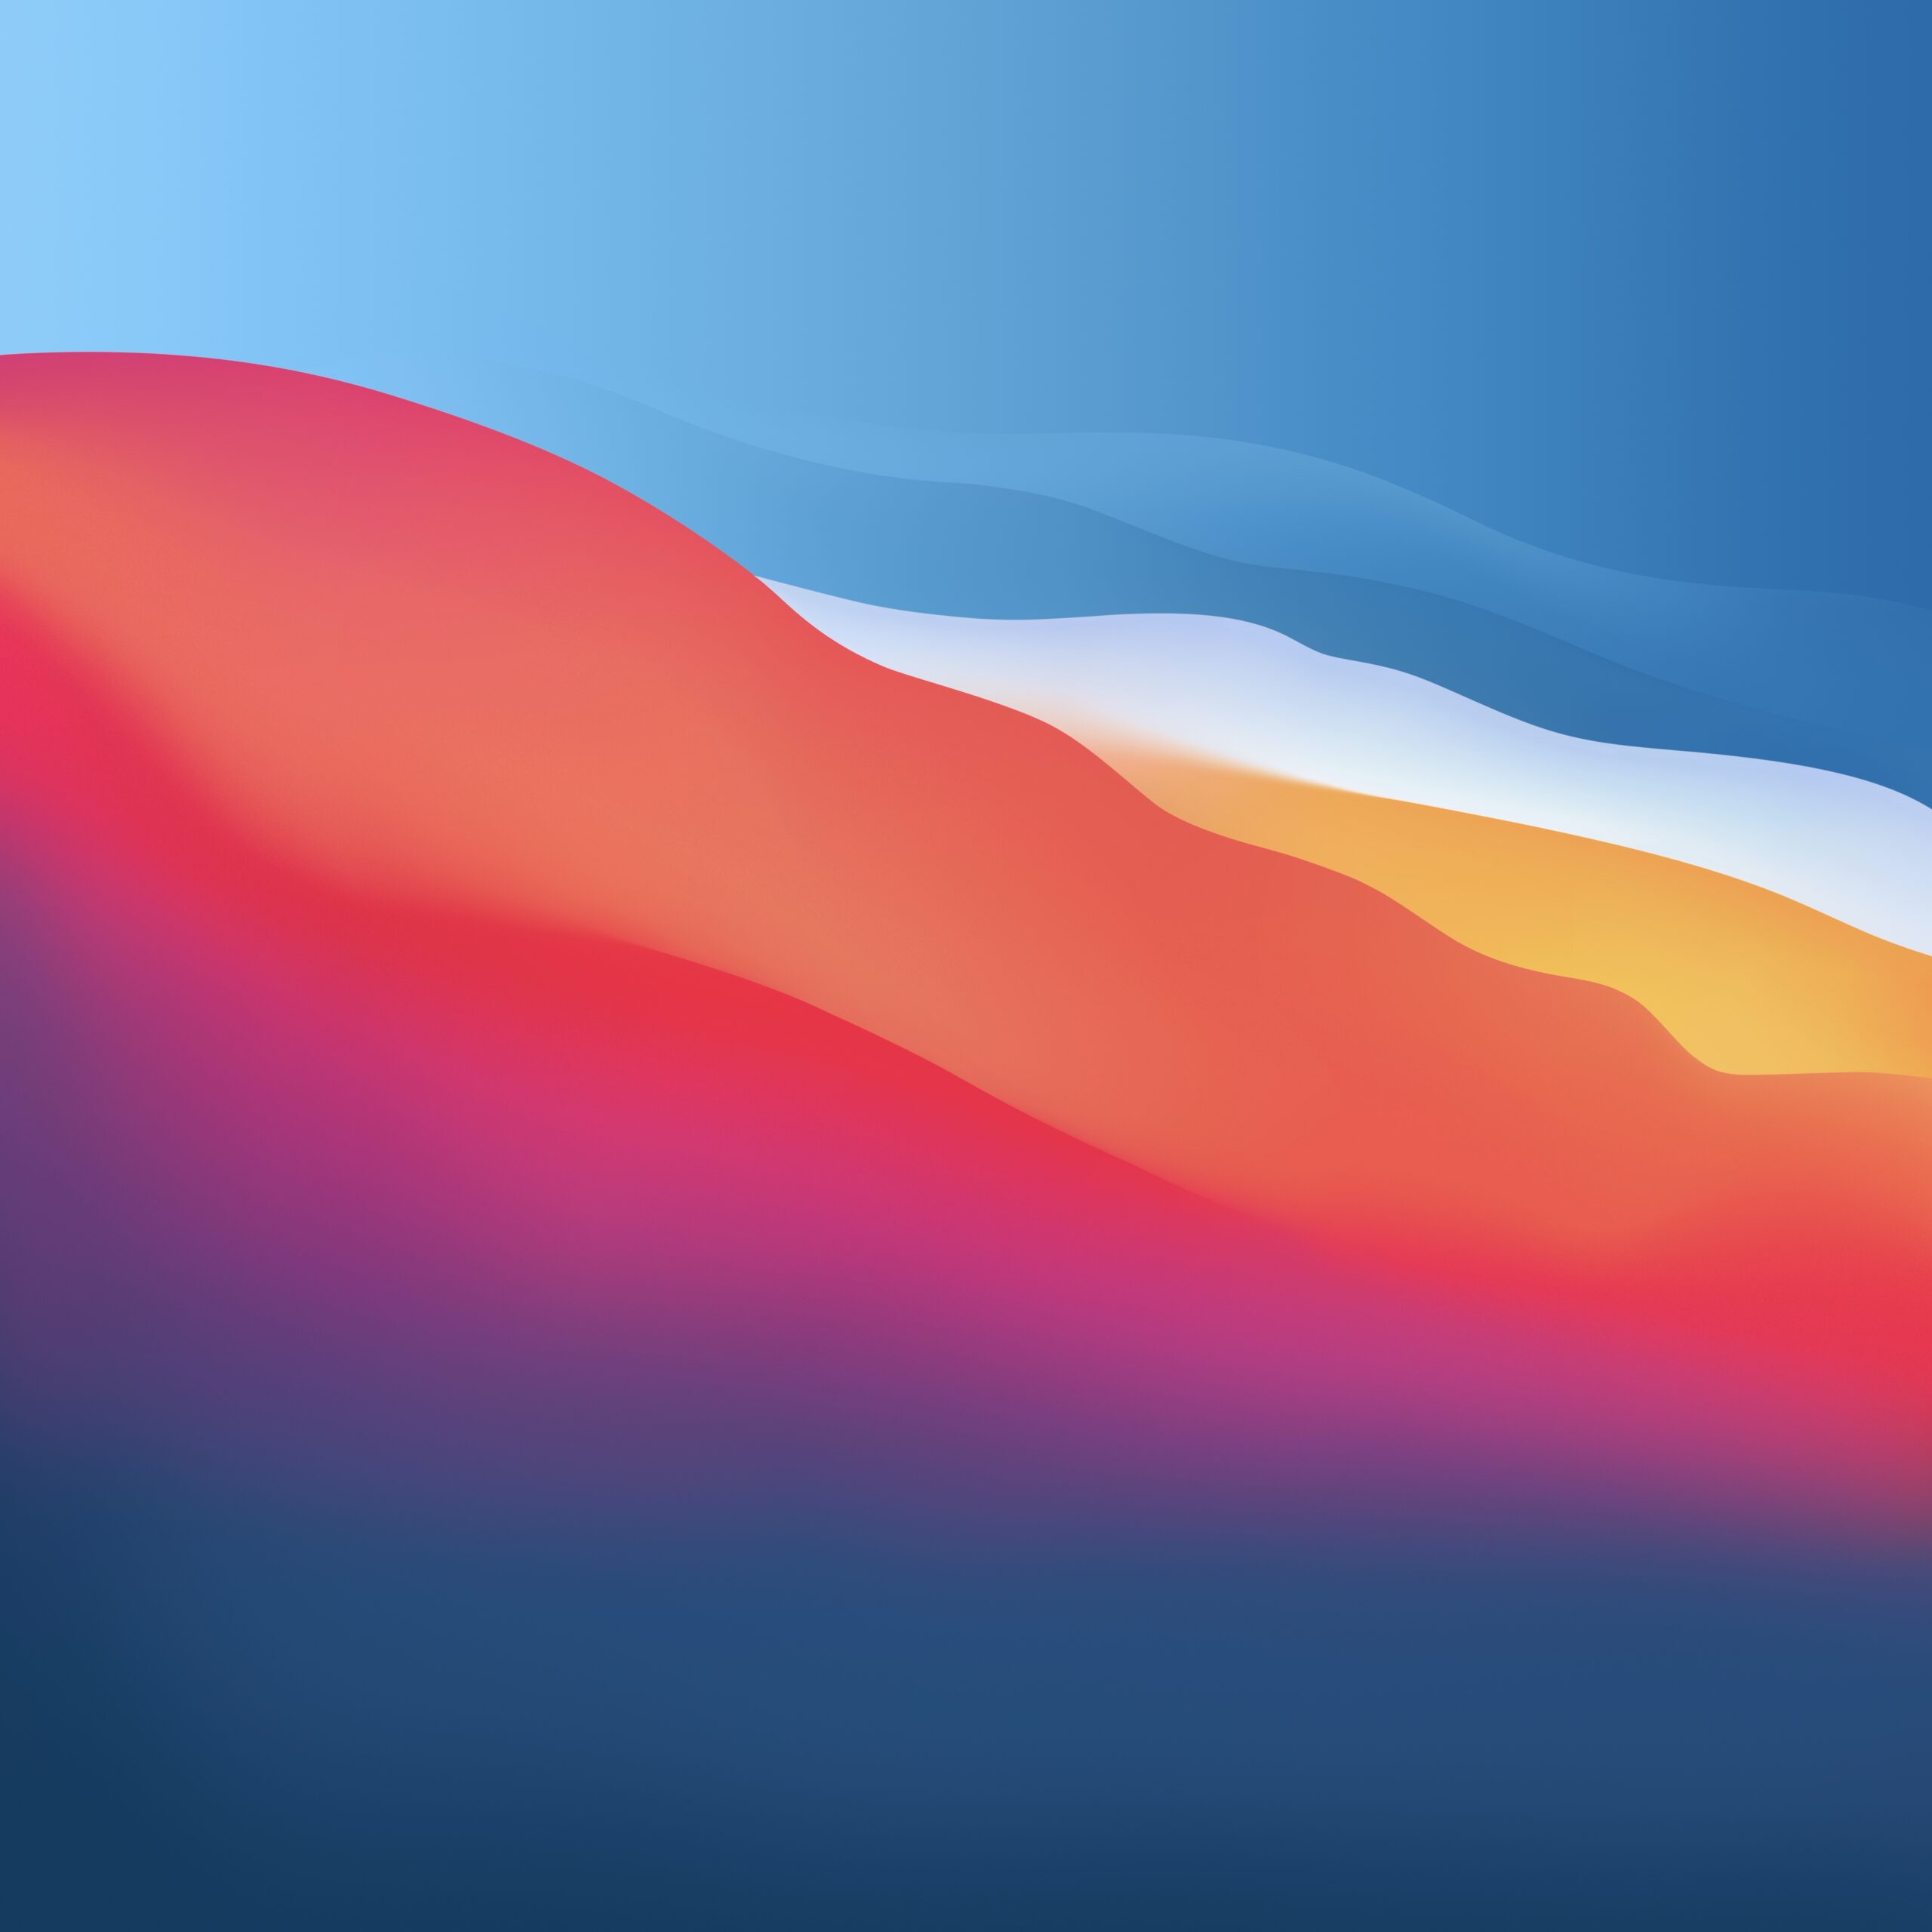 Get the macOS Big Sur Default Wallpapers | OSXDaily